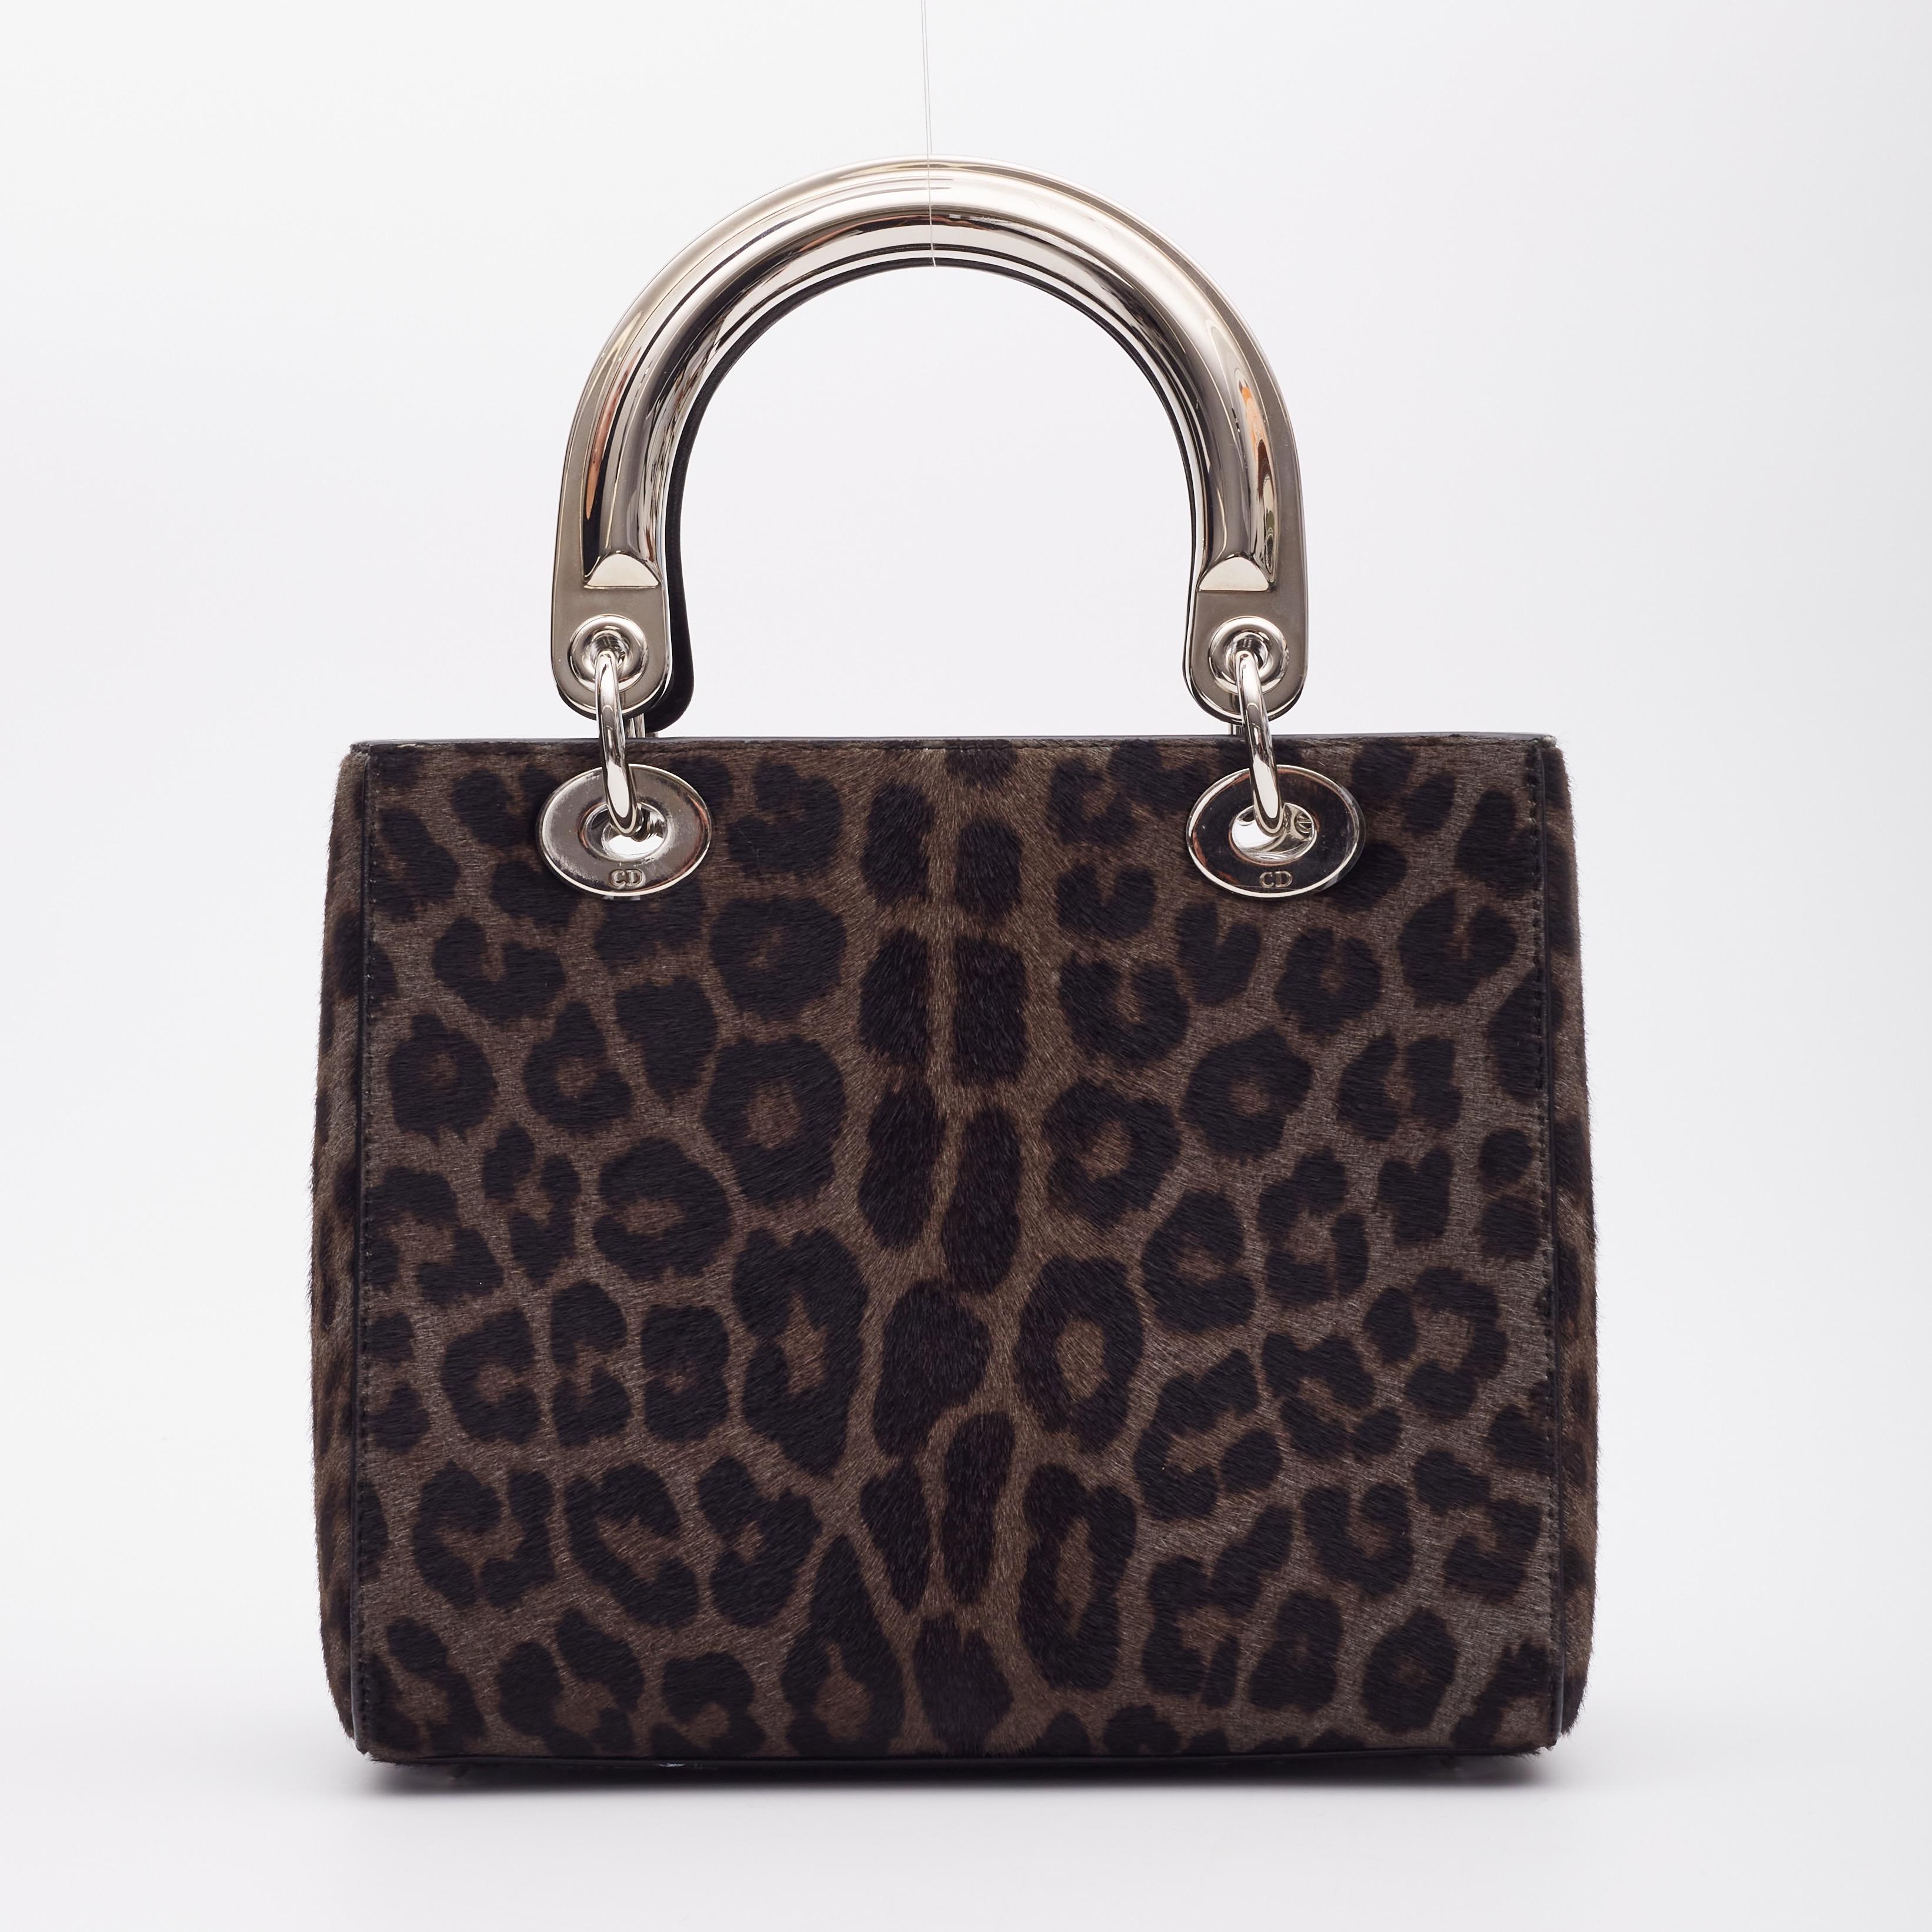 Dior Vintage Grey Black Calf Hair Leopard Print Lady Dior Bag In Good Condition For Sale In Montreal, Quebec